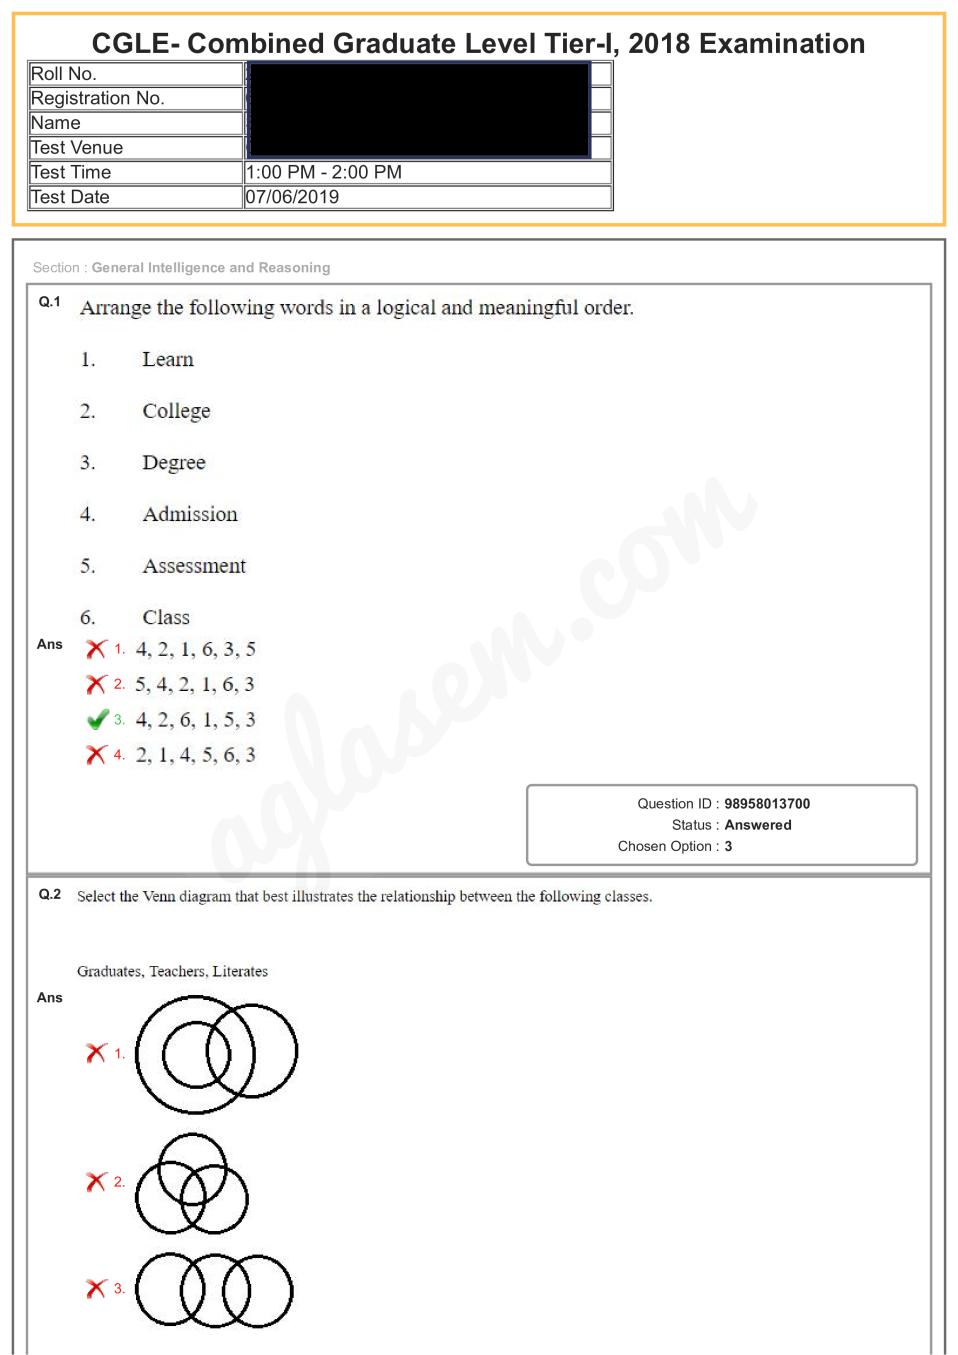 SSC CGL Question Paper Tier 1 2018 Exam - 07 jun 2019 second shift - Page 1